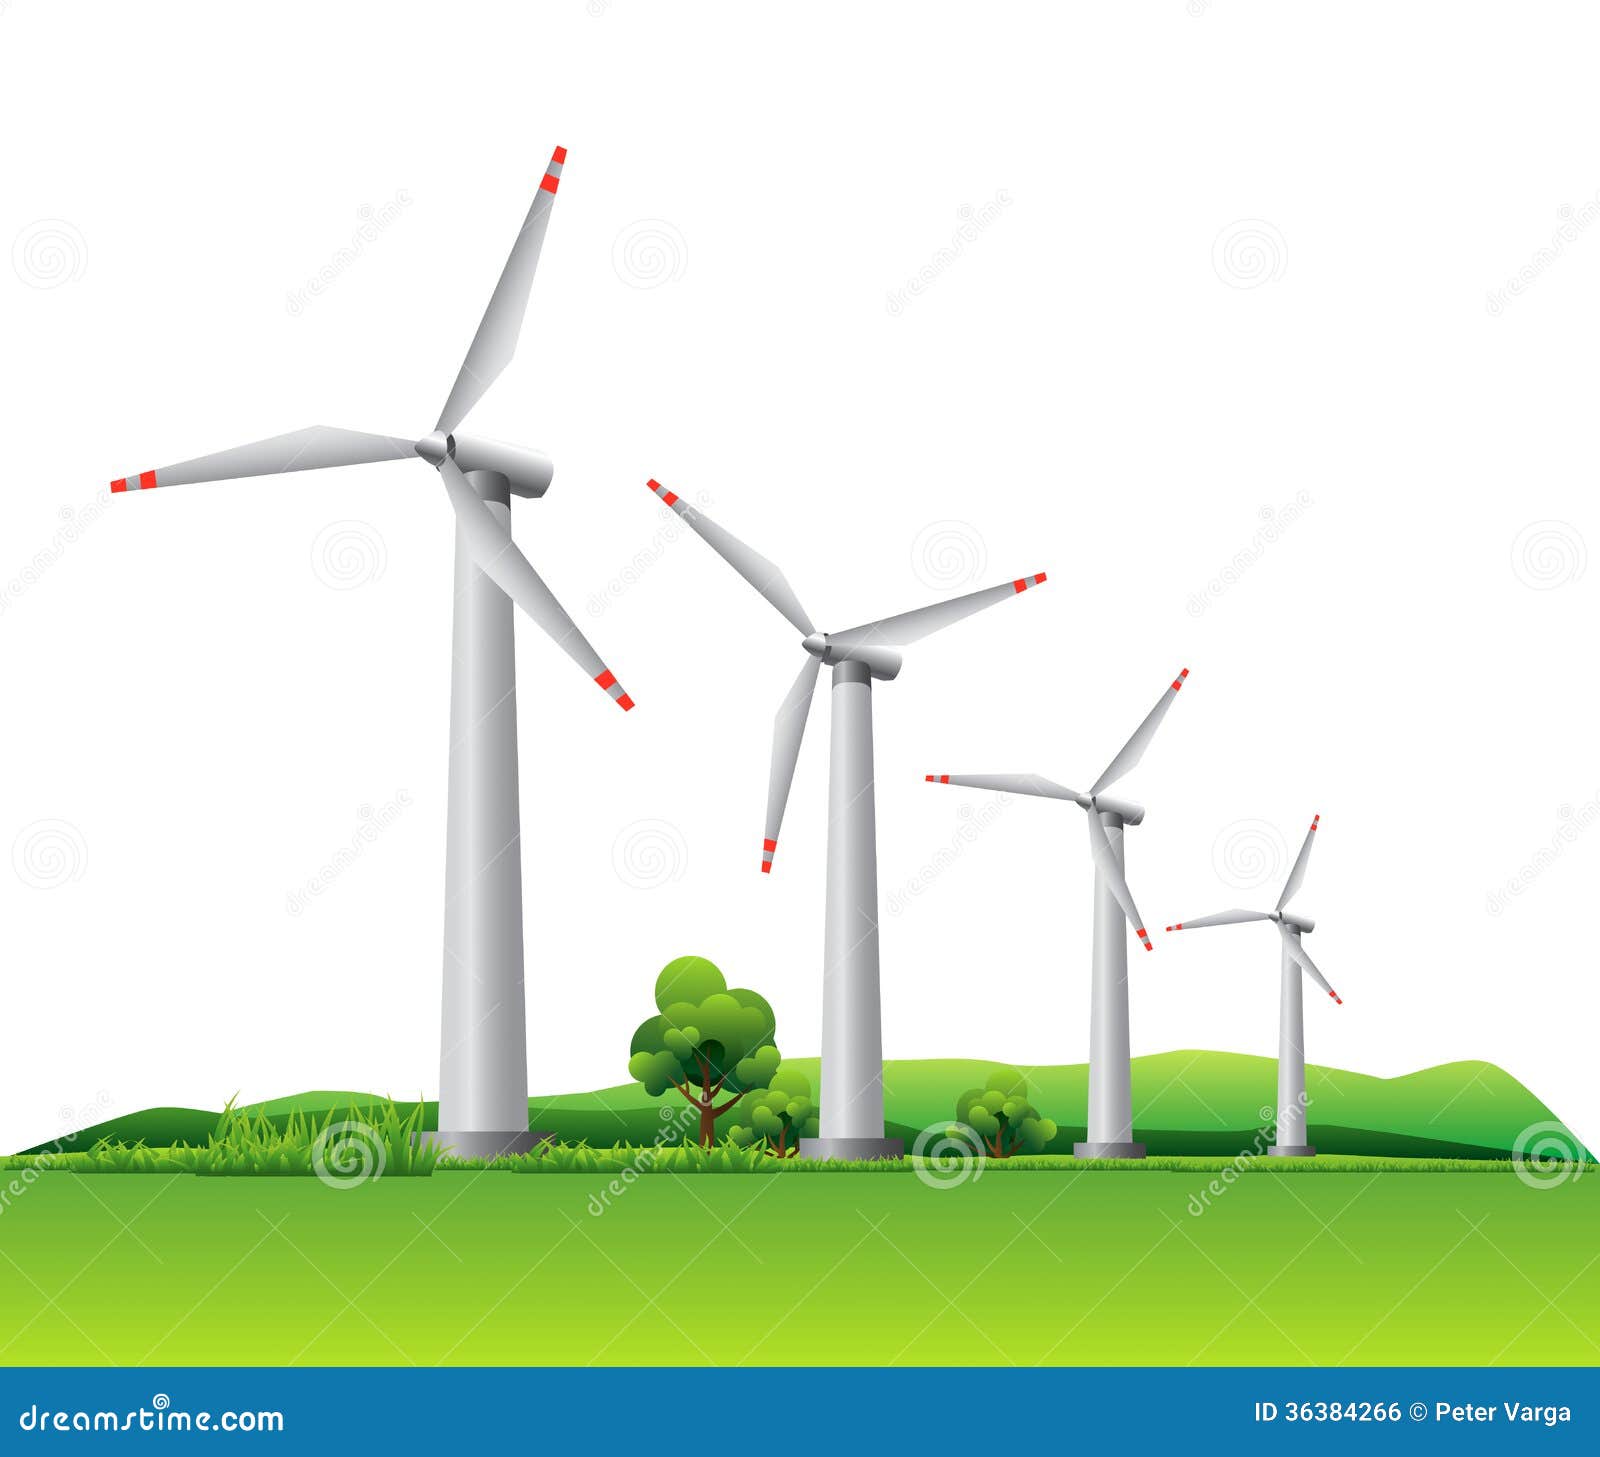 Four wind turbines on a meadow. This illustration is EPS10 vector file 